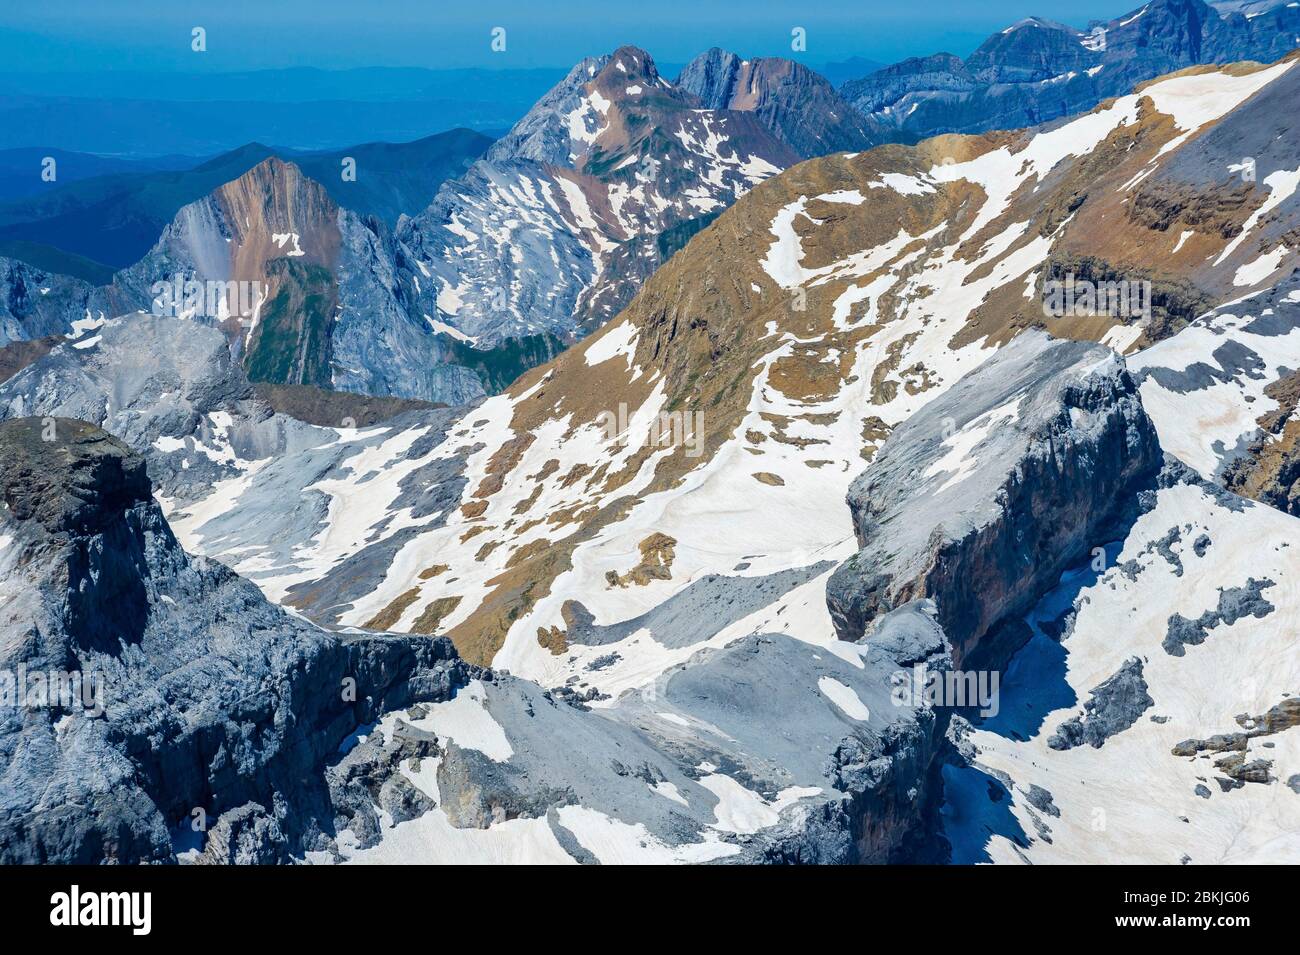 Spain, Aragon, comarque of Sobrarbe, province of Huesca,National Park of Ordesa and Monte Perdido, listed as World Heritage by UNESCO, panorama over the Brèche de Roland (bottom right), the Taillon 3146m (top right) and in the back, the Peña de Otal 2709m and the Sierra Tendenera 2853m, from the summit of Marbore 3252m Stock Photo